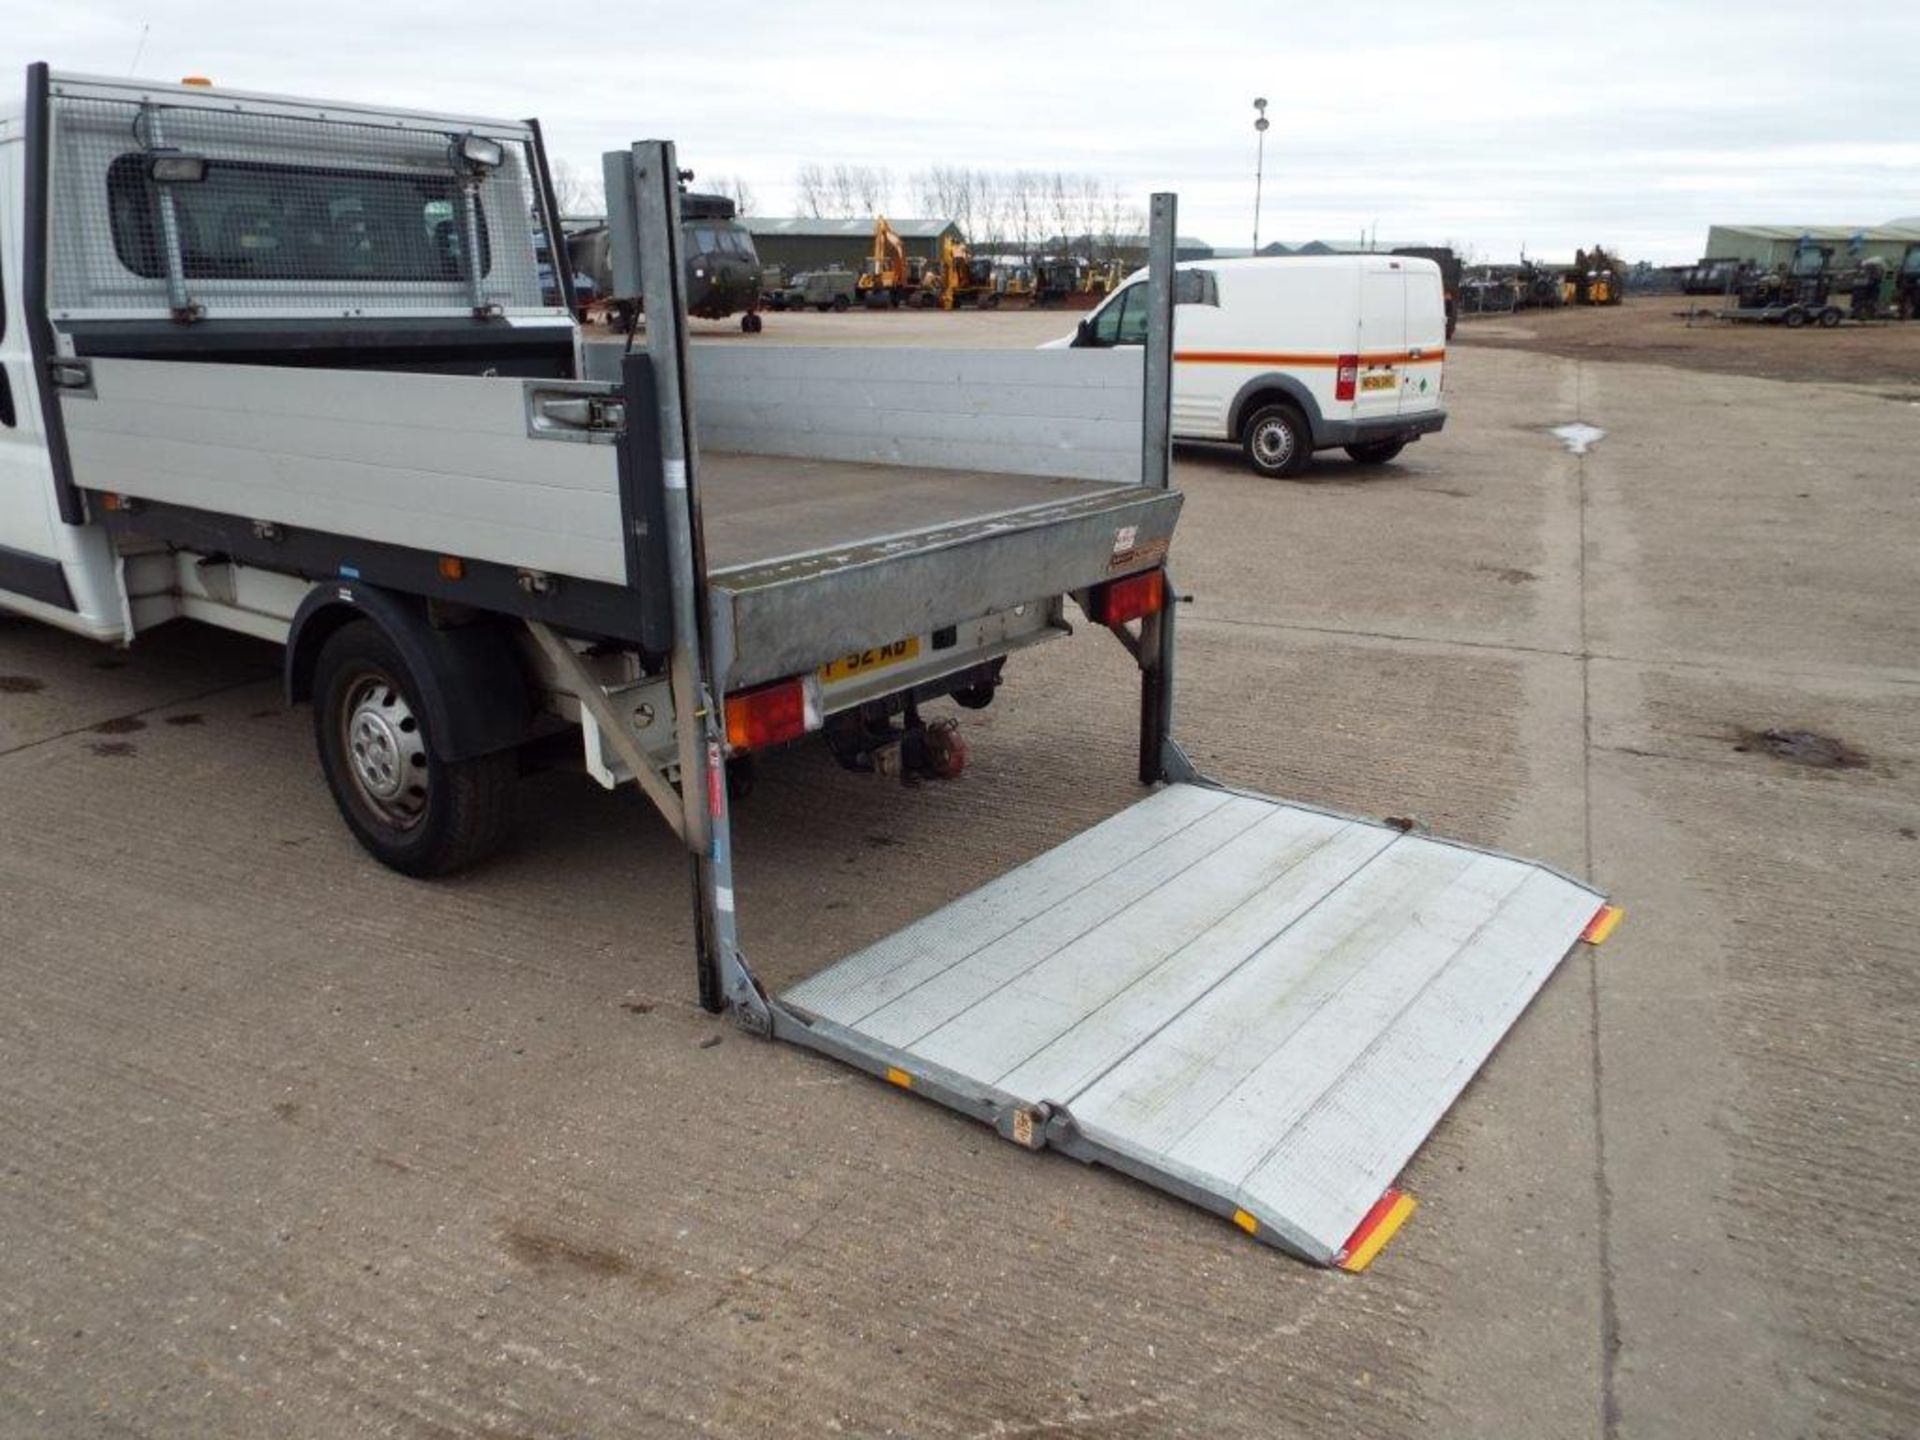 Citroen Relay 7 Seater Double Cab Dropside Pickup with 500kg Ratcliff Palfinger Tail Lift - Image 21 of 29